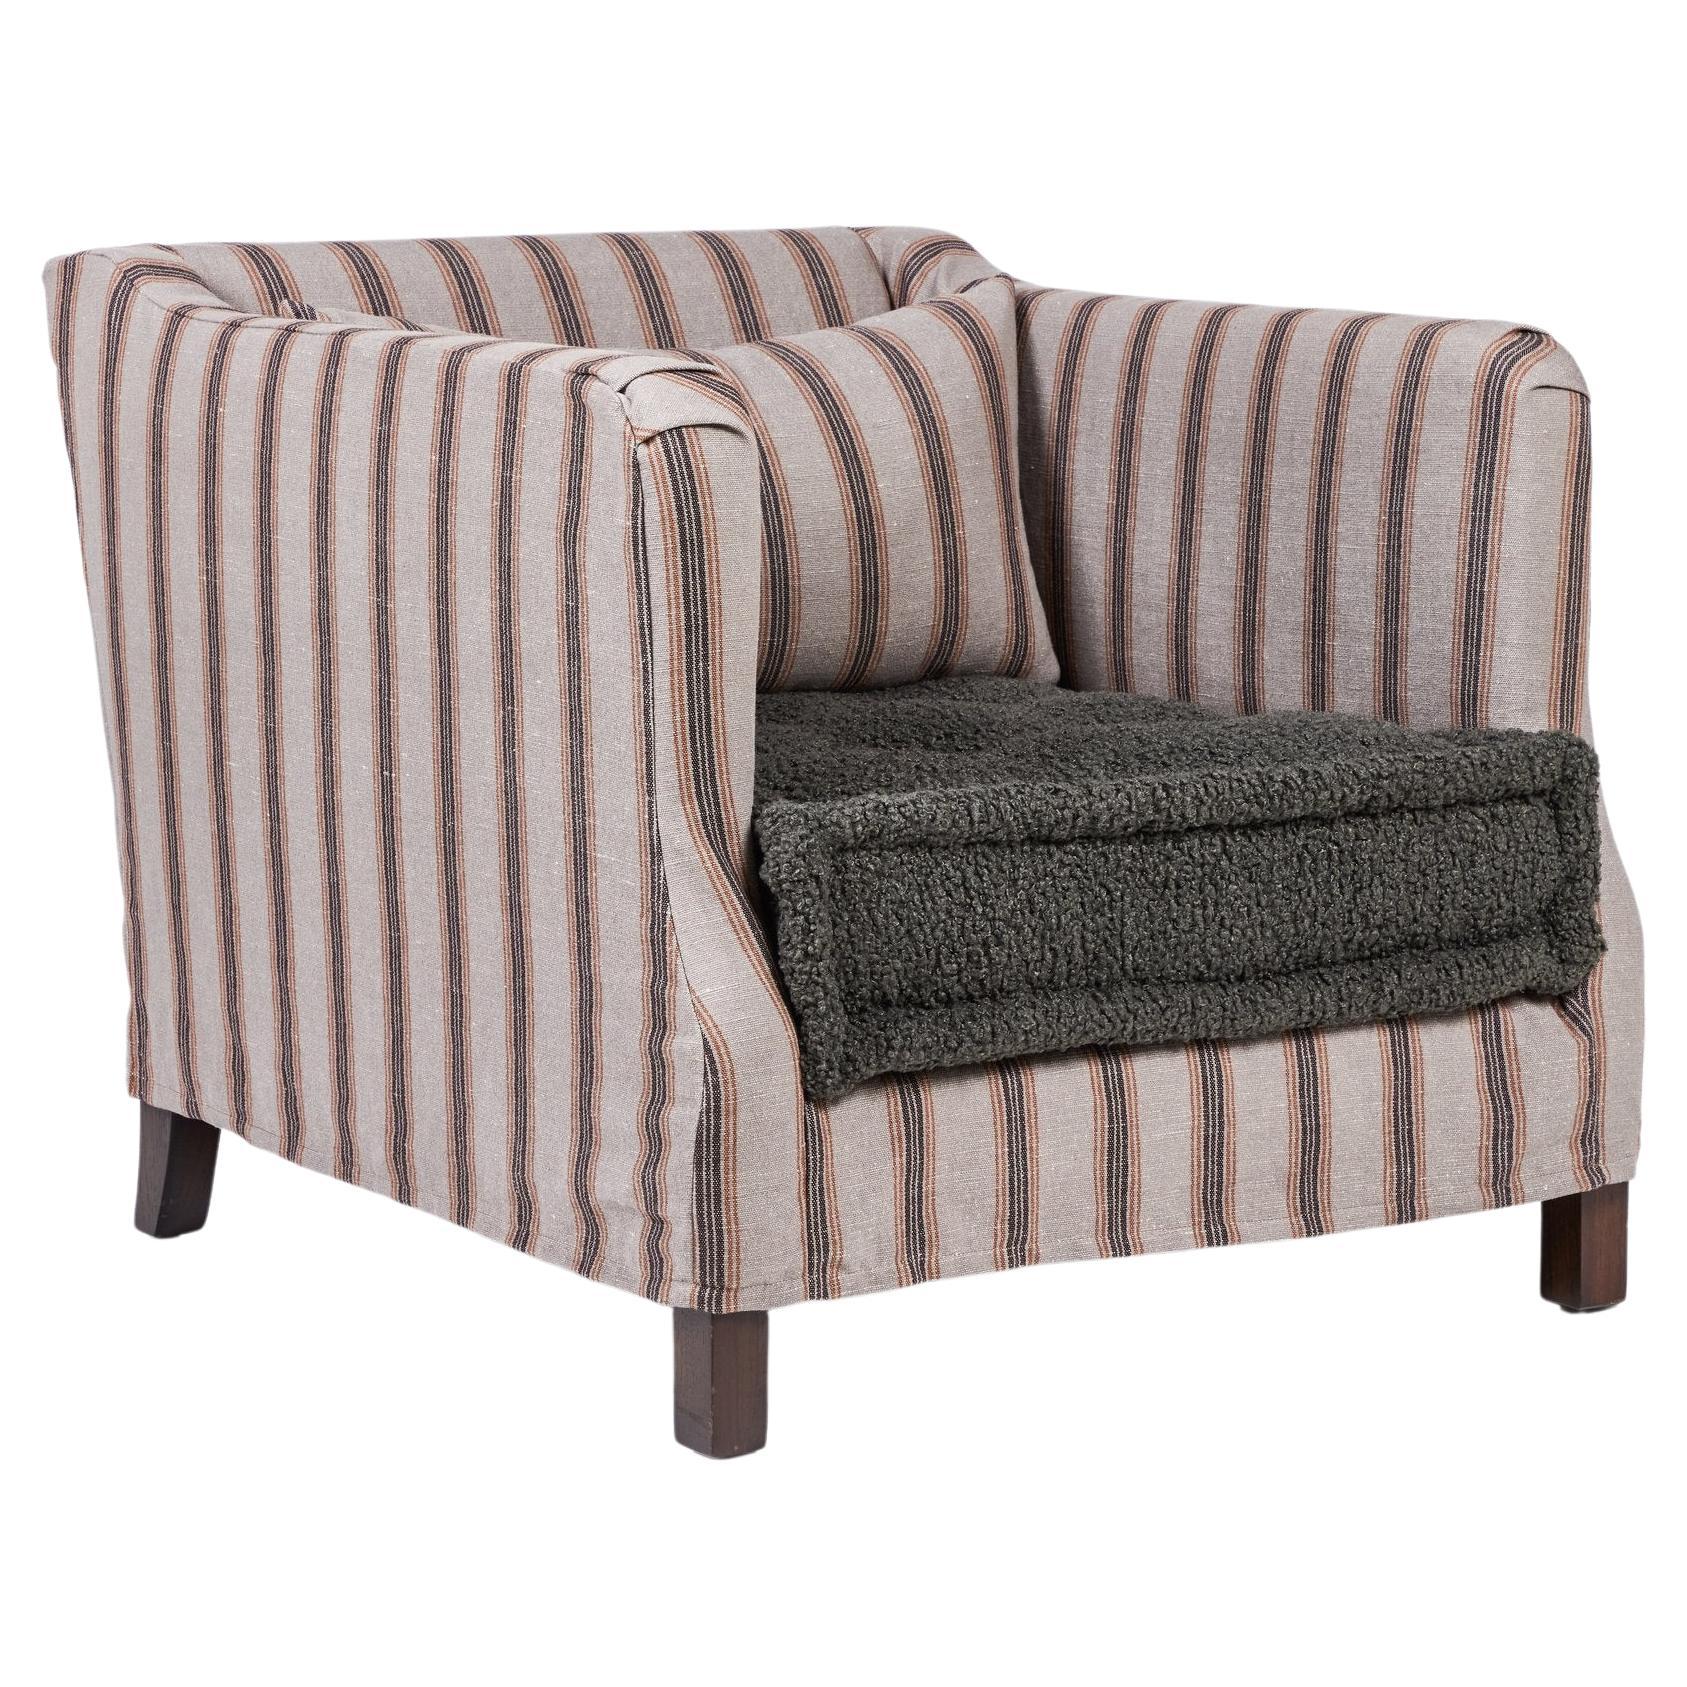 Slipcover lounge chair with French mattress seat cushion